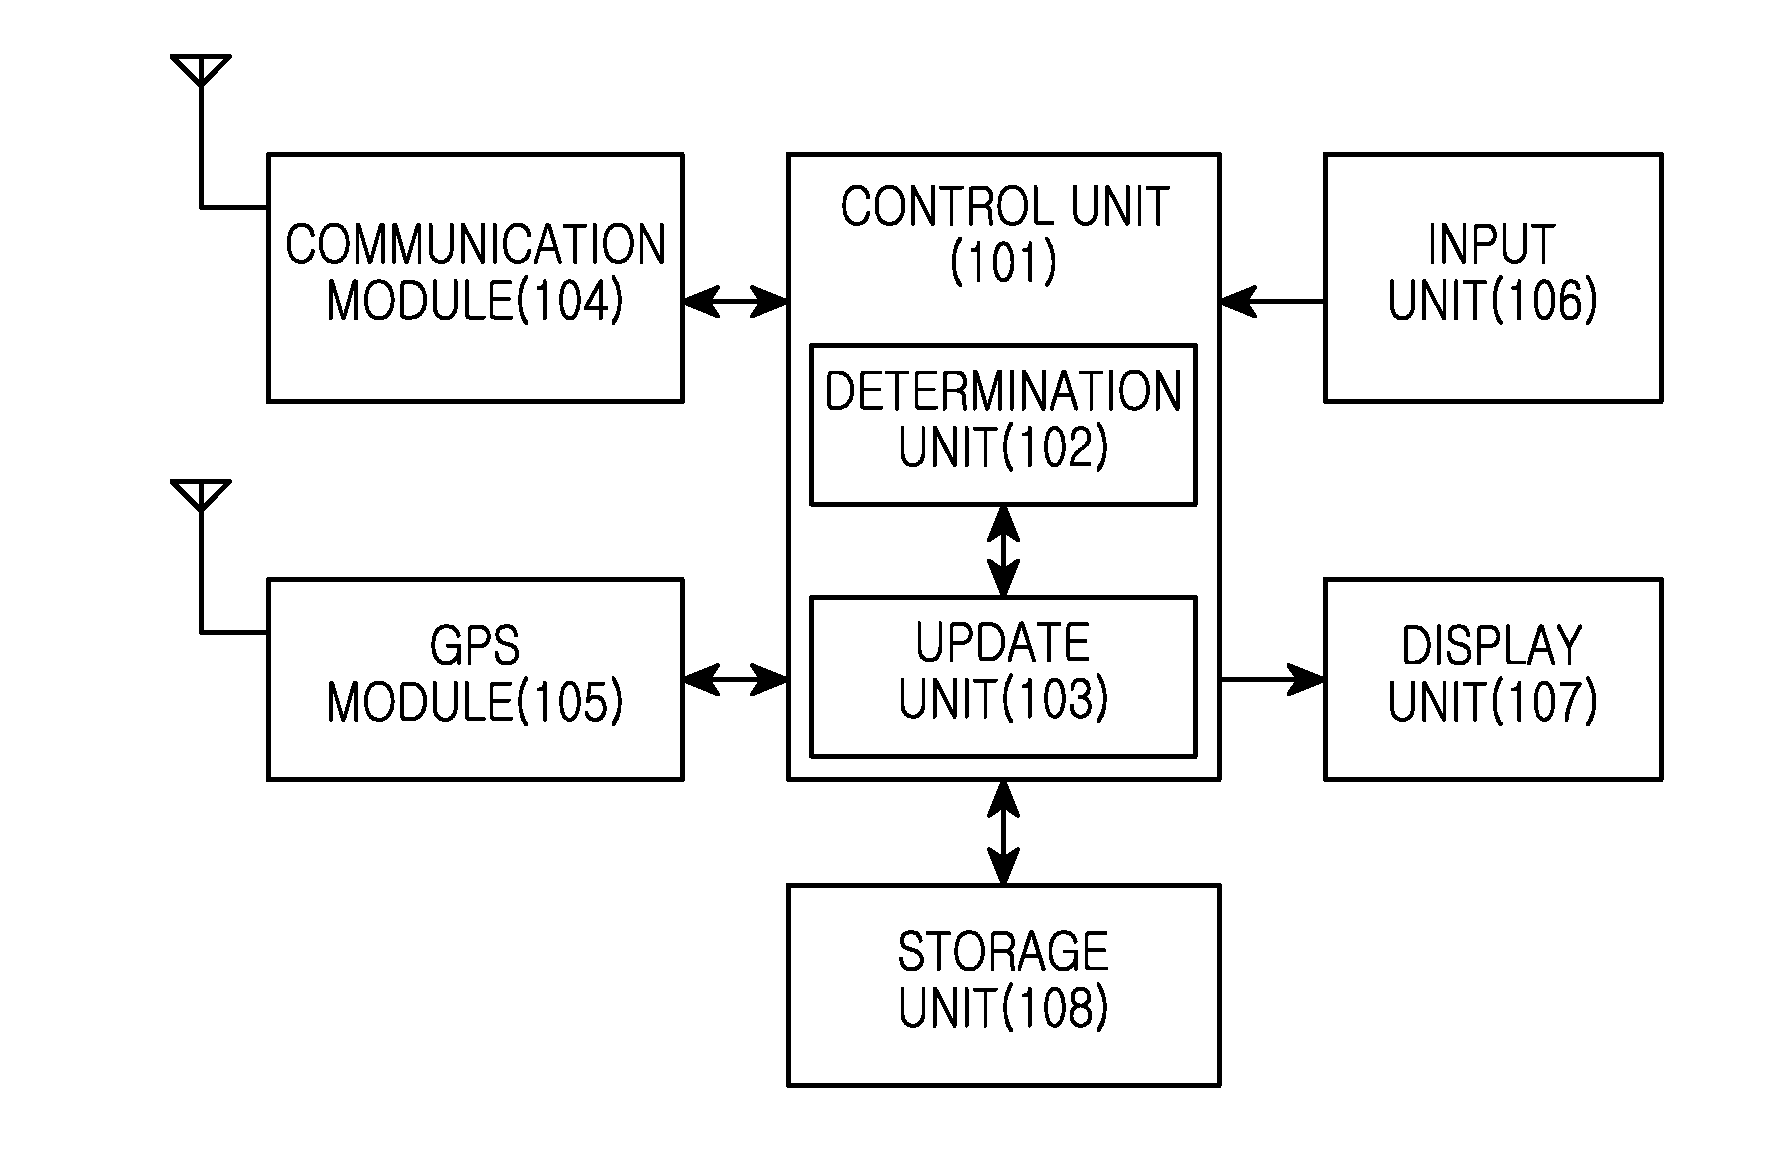 Apparatus and method for allocating d2d id of user terminal in ad-hoc network